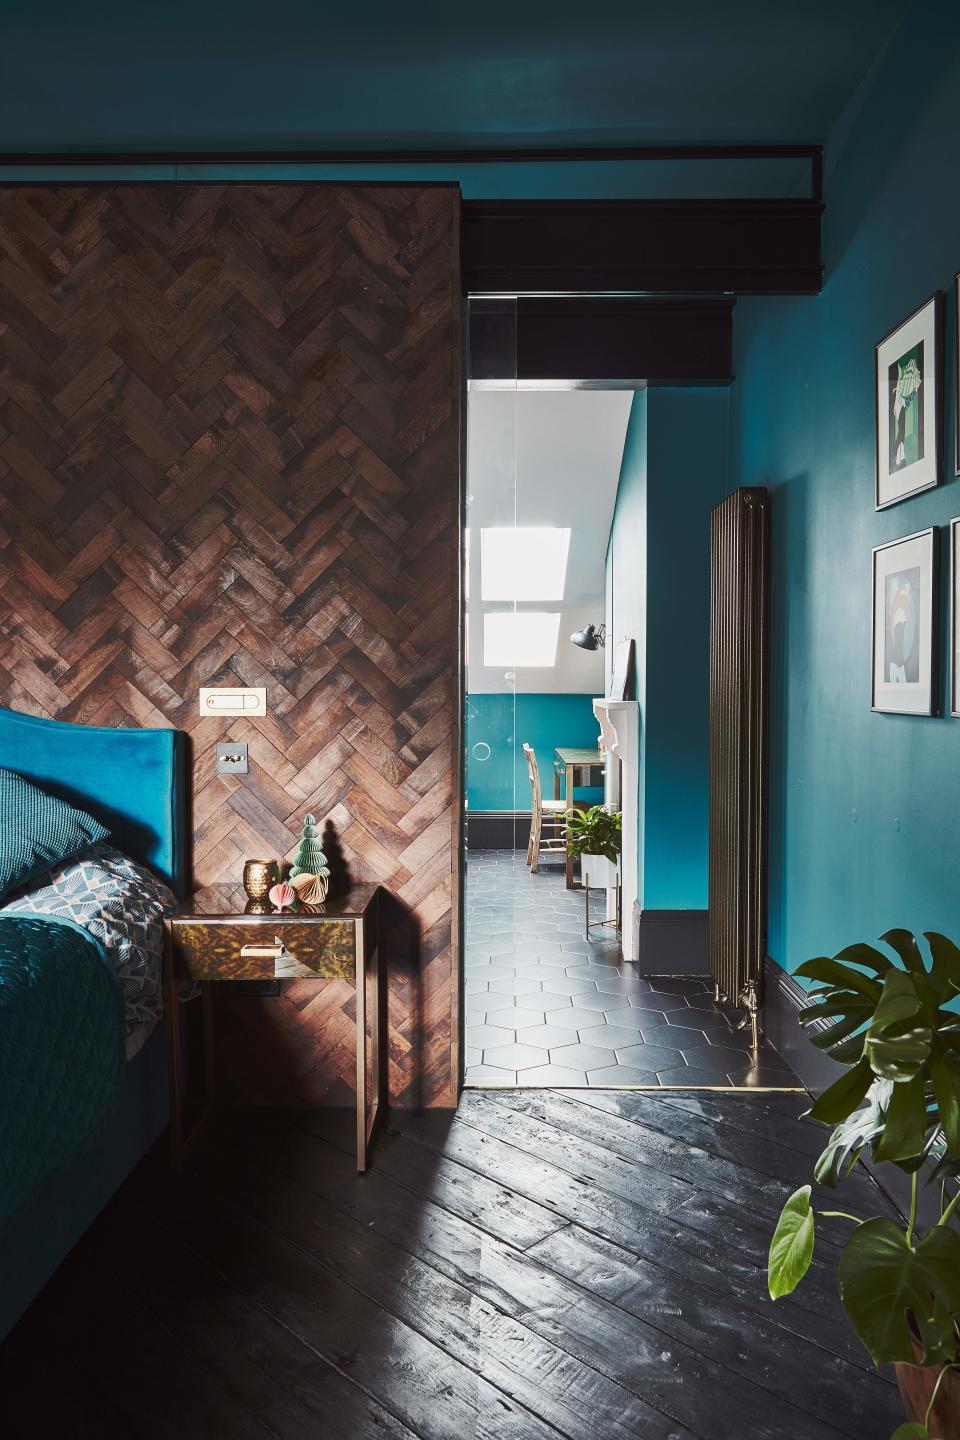 <p> Black and blue isn&apos;t a combo you see very often, but in this blue bedroom, it totally works, with the walnut woods adding some lovely texture too, definitely one to try out. </p> <p> This is the ideal color scheme for rooms that don&apos;t get tons of natural light too so you can really embrace that dark, cocooning feeling. &apos;East-facing rooms are drenched with morning light but cooler in the afternoon so work with nature and play to this bias using soft Aquas, (essentially blue/ green shades).&apos; </p> <p> &apos;They have a natural affinity to the lighting conditions but rarely feel too icy due to the blend of both colors. Aqua has a lovely restful quality and is super flexible depending on how you decorate your room with other furnishings which can make the room feel either modern or traditional.&apos; &#xA0;says Patrick O&#x2019;Donnell of Farrow &amp; Ball.&#xA0; </p> <p> Note how the ceilings are painted as well, adding even more depth and drama &#x2013; a winning ceiling idea.&#xA0; </p>